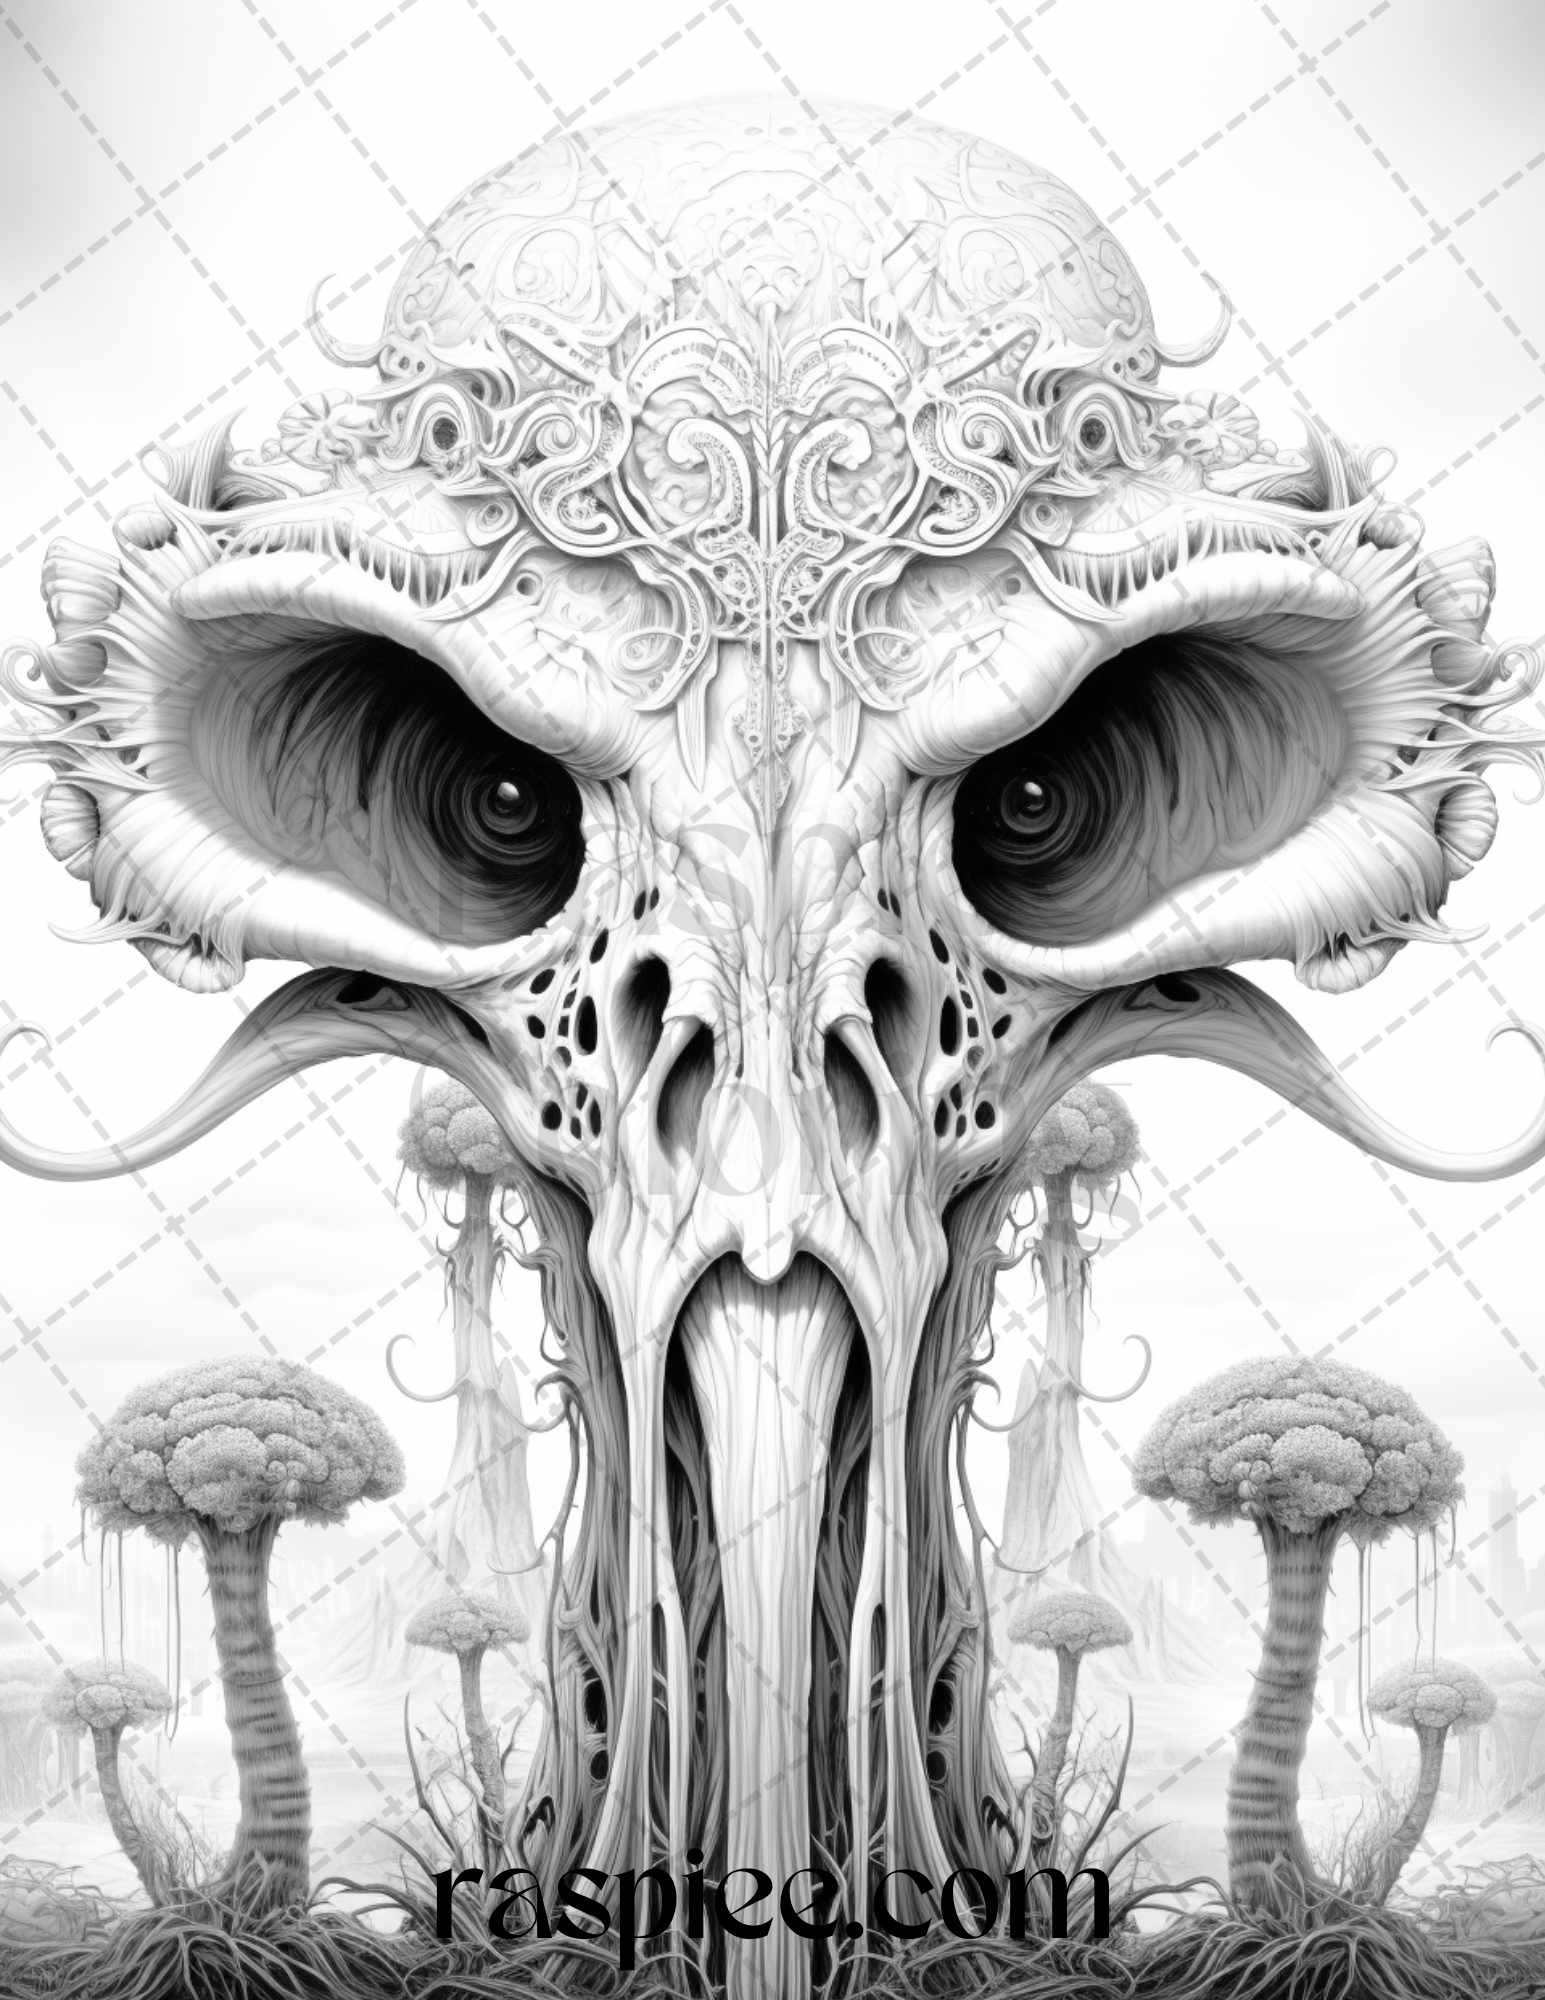 Grayscale coloring page of a surreal creature with intricate details, Fantasy grayscale coloring illustration for stress relief, Printable adult coloring image of whimsical animal in grayscale style, Detailed grayscale art of a mystical creature for DIY coloring